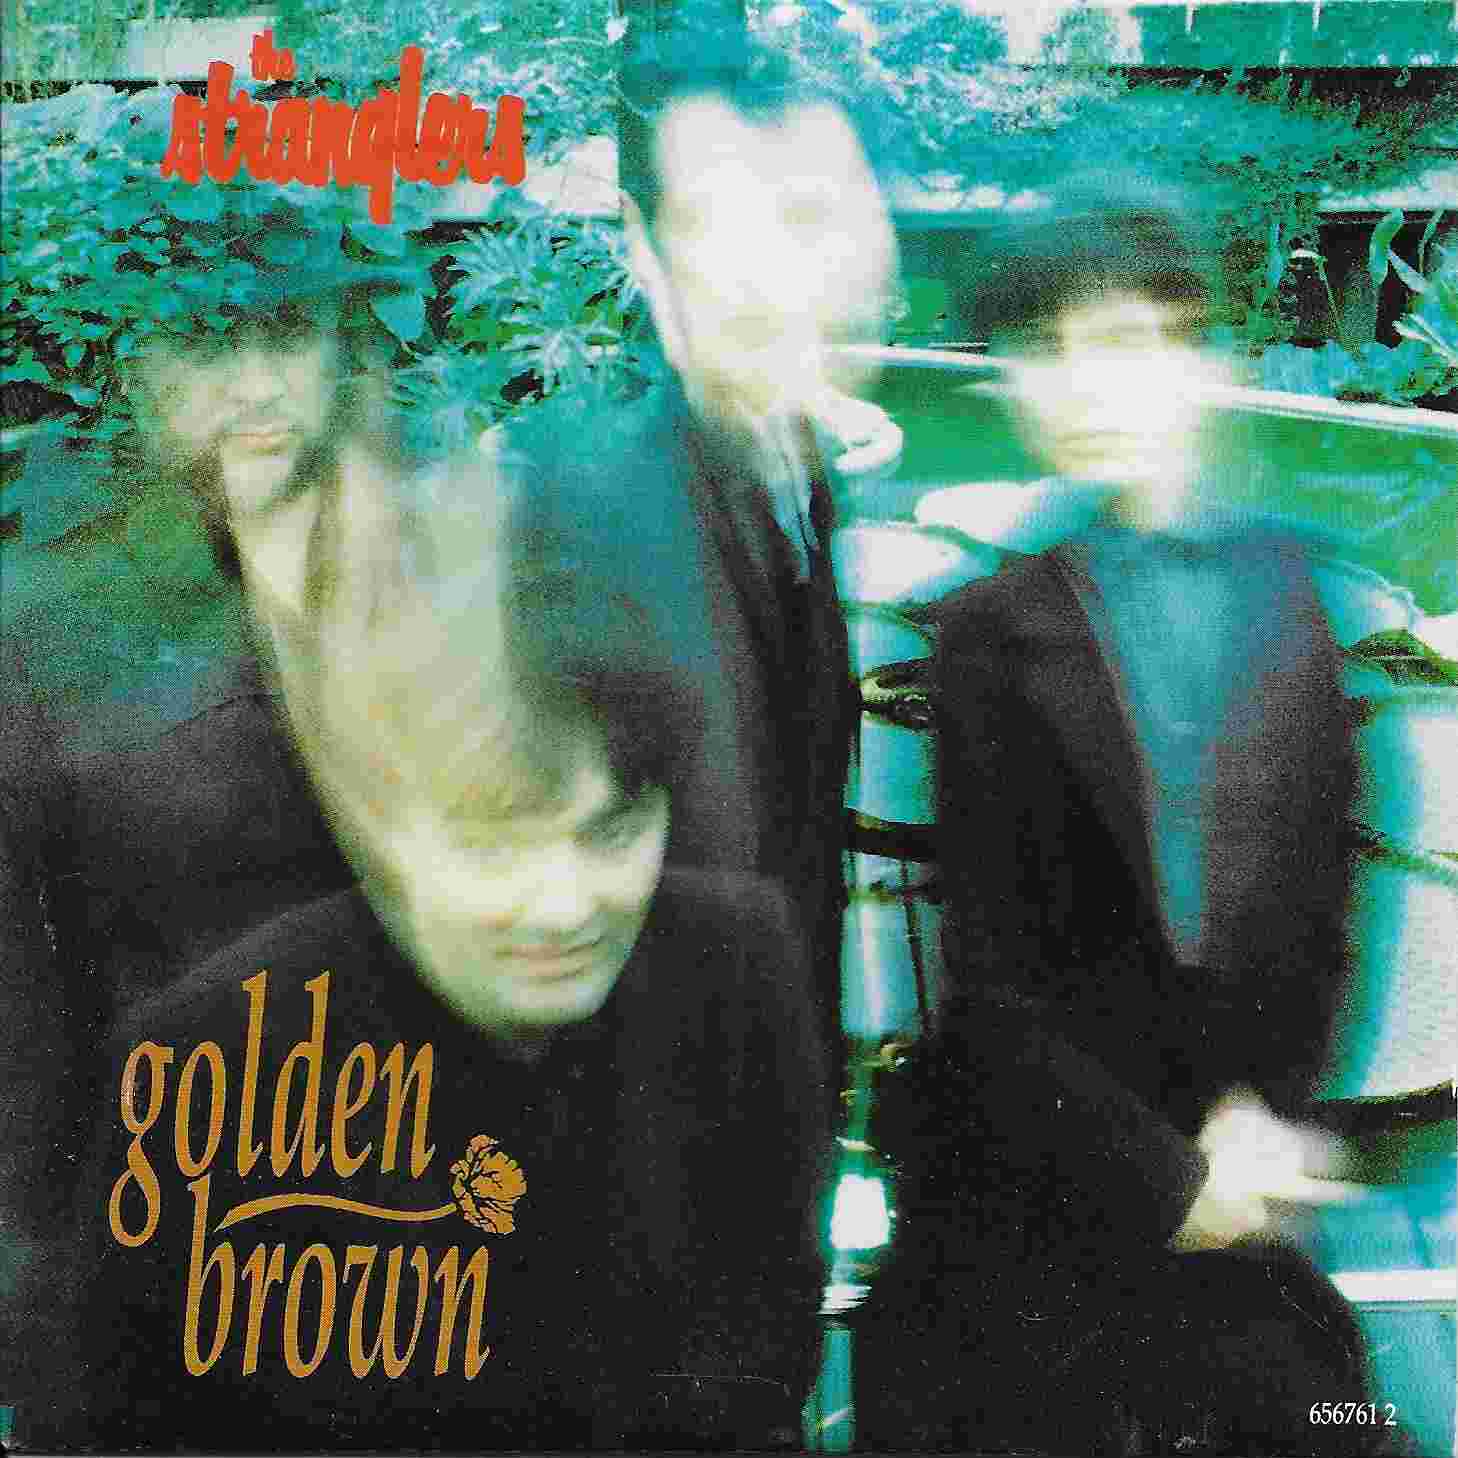 Picture of Golden brown by artist The Stranglers  from The Stranglers cdsingles